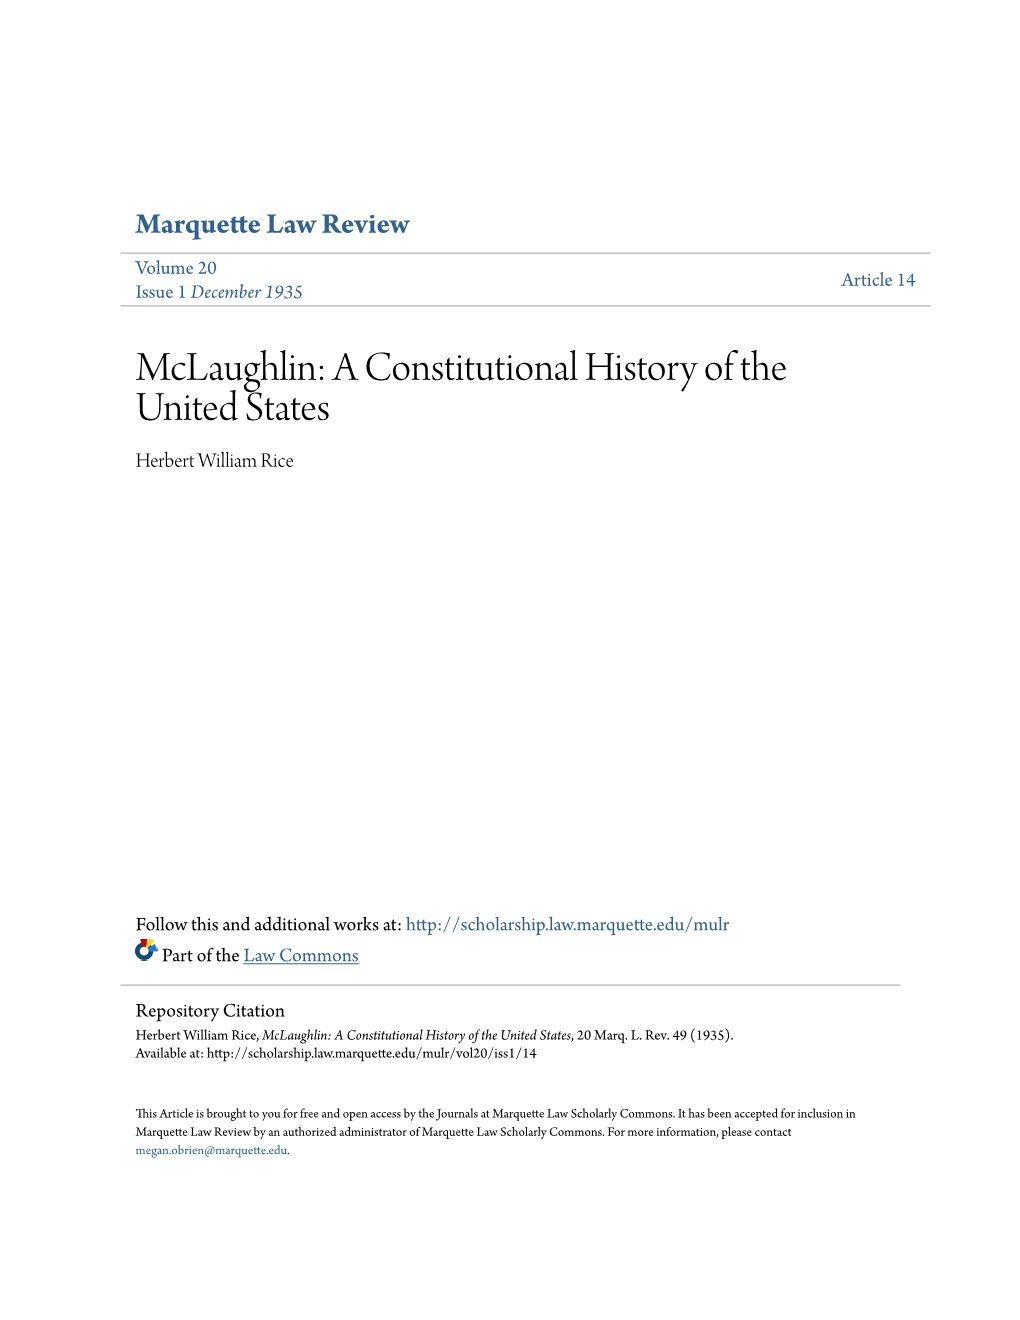 Mclaughlin: a Constitutional History of the United States Herbert William Rice